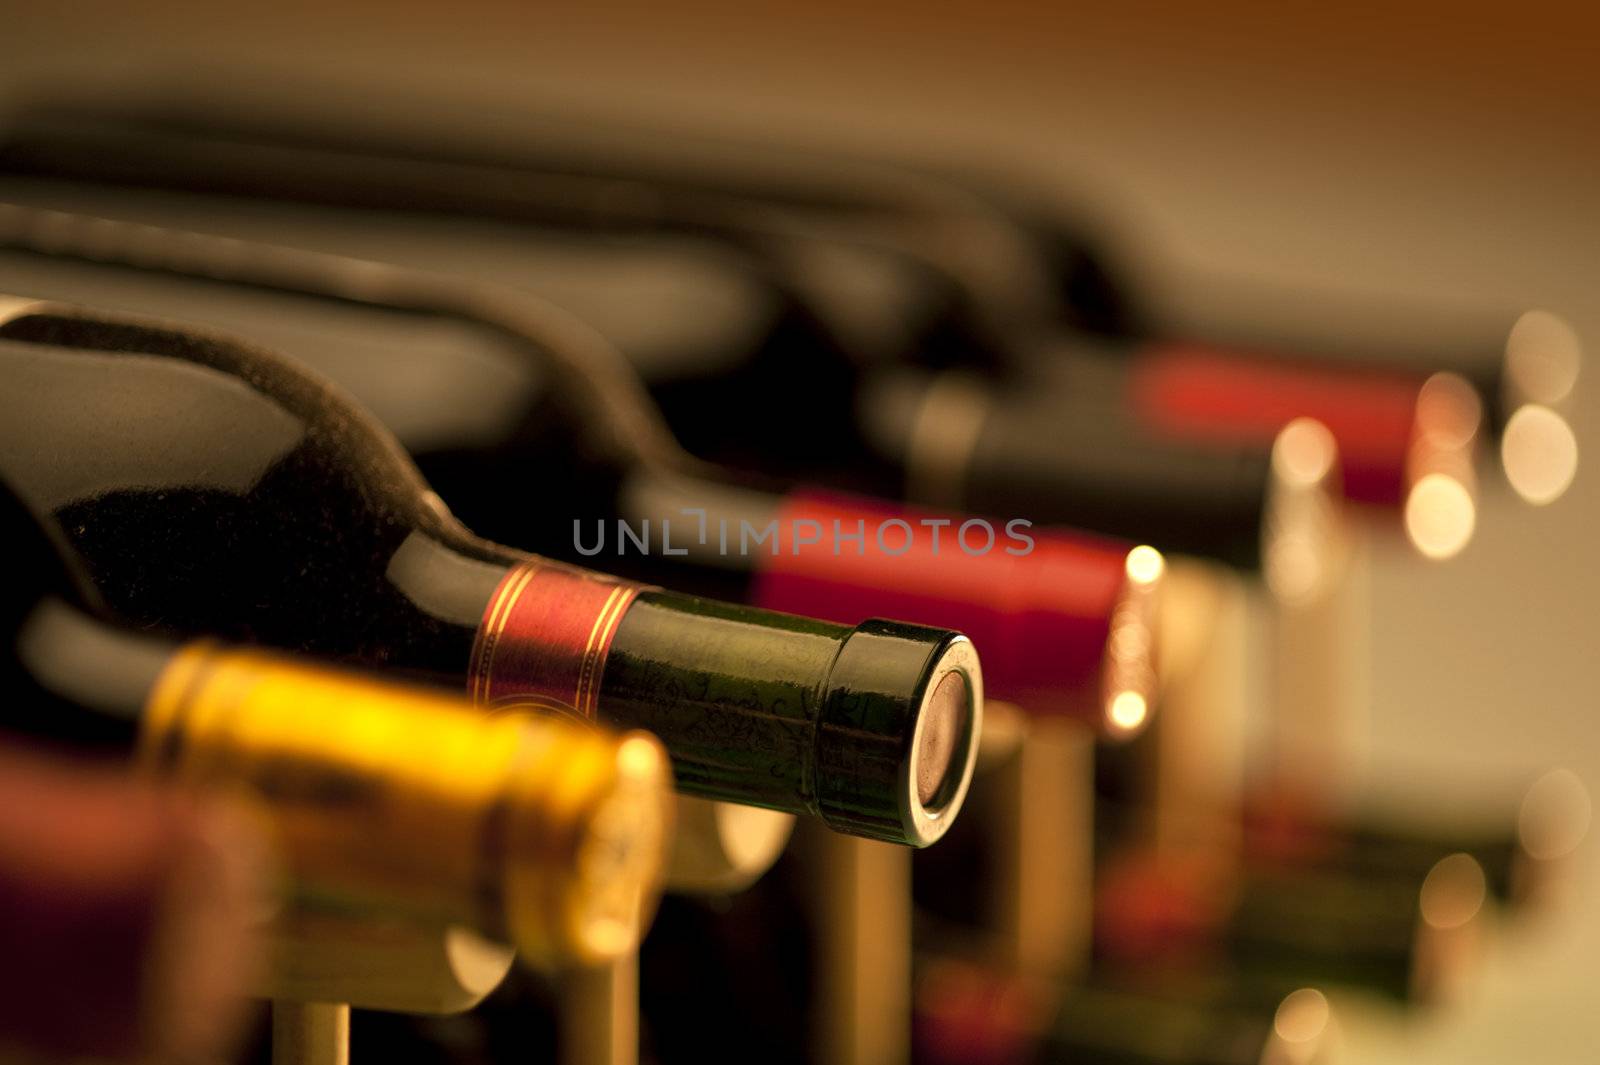 Red and white wine bottles stacked in a wooden rack by f/2sumicron